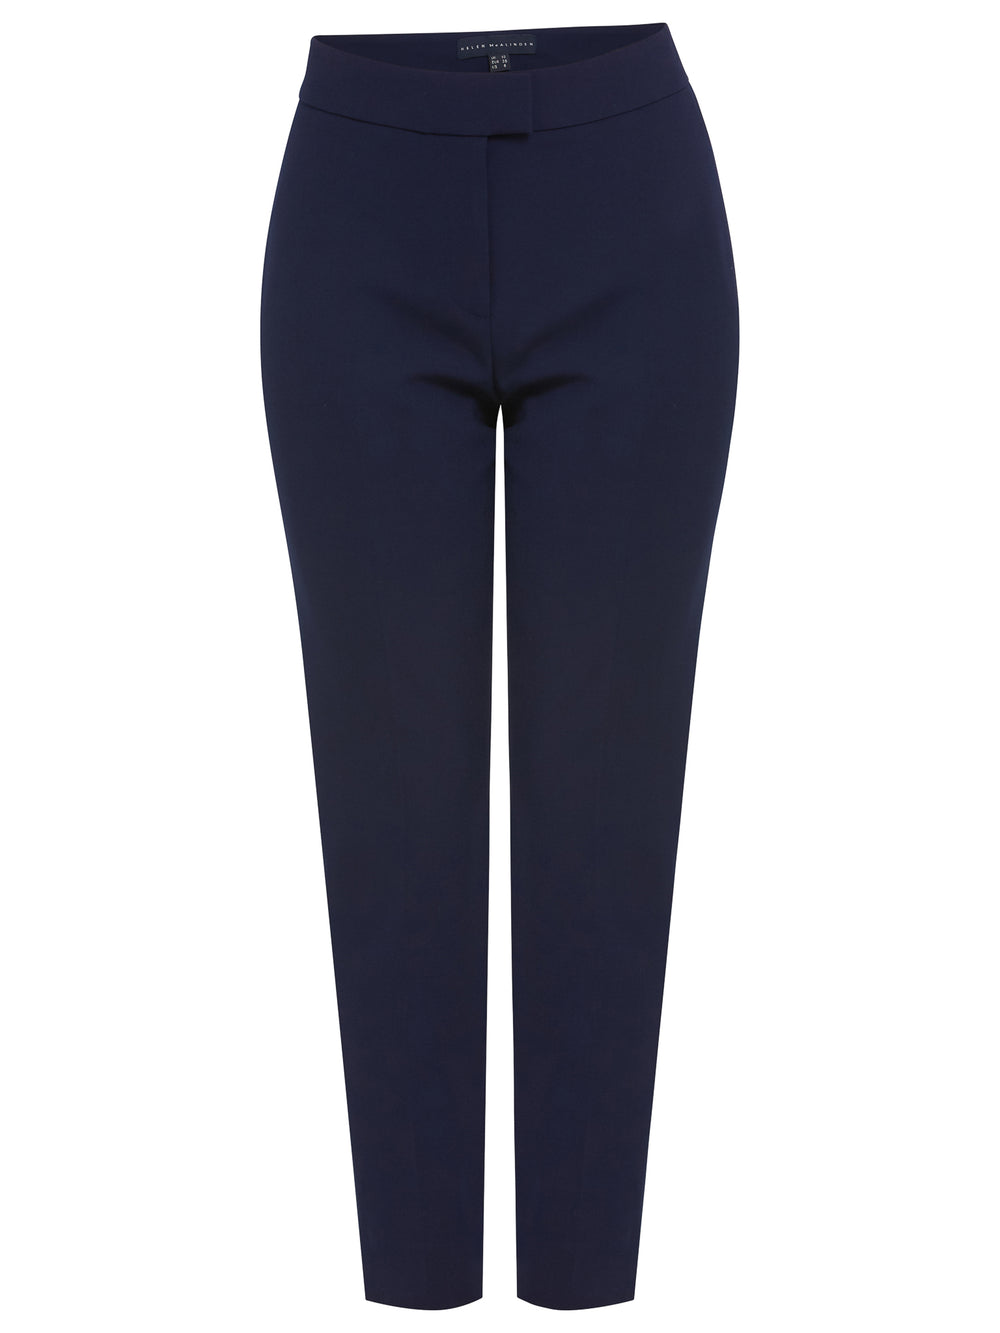 Jill is back! Investment worthy, neat narrow leg trouser with a hint of stretch. A wardrobe staple and HMcA classic, here in a sophisticated navy shade.